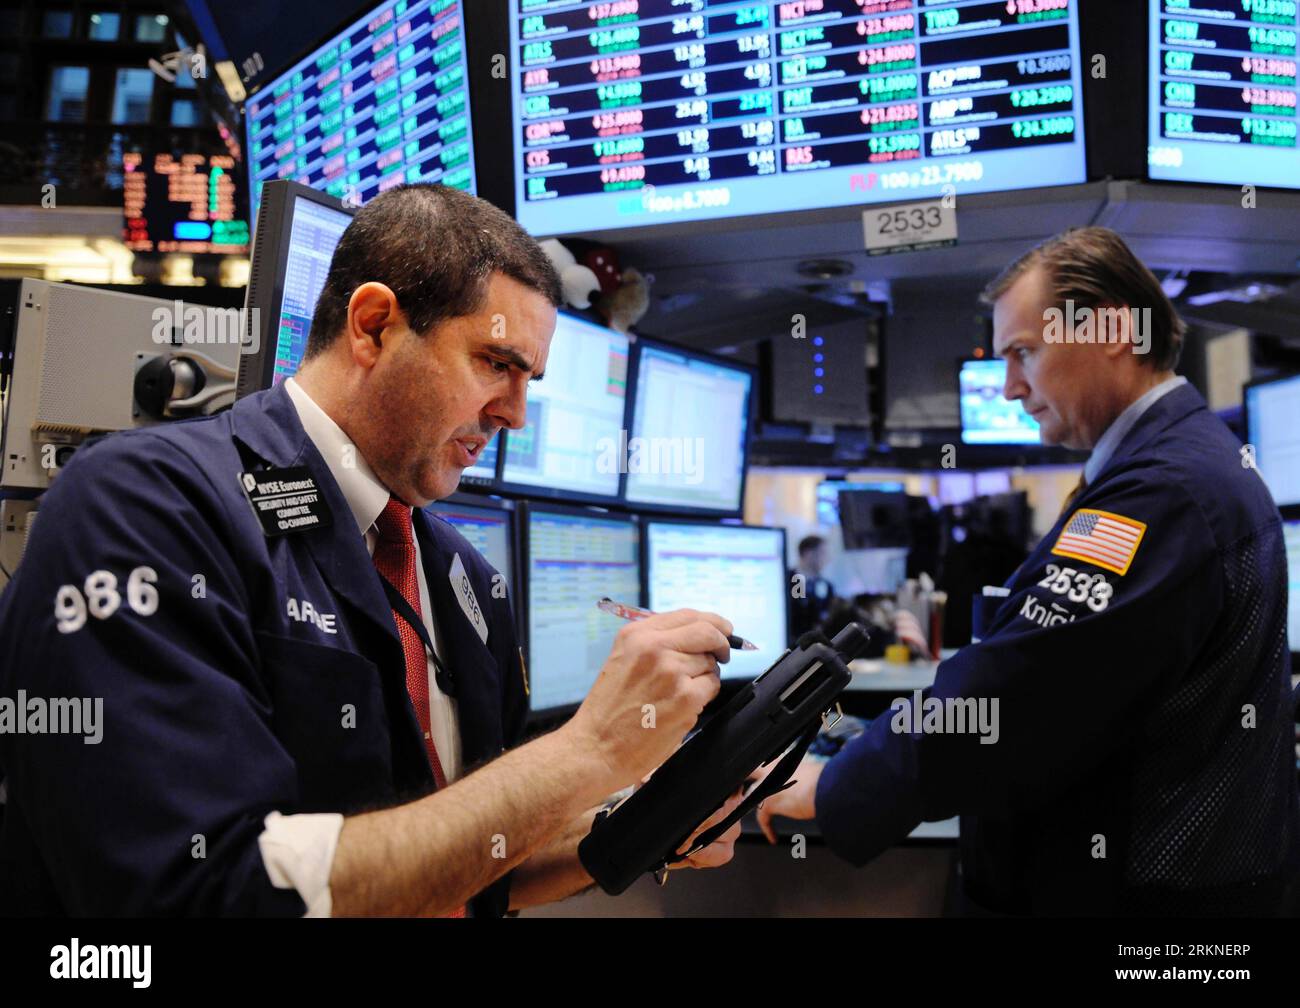 Bildnummer: 57106420  Datum: 24.02.2012  Copyright: imago/Xinhua (120224) -- NEW YORK, Feb. 24, 2012 (Xinhua) -- Traders work on the floor of the New York Stock Exchange in New York, the United States, Feb. 24, 2012. U.S. stocks ended slightly mixed on Friday with the S&P posting its best finish since June 2008. (Xinhua/Shen Hong) US-NEW YORK-STOCK-S&P PUBLICATIONxNOTxINxCHN Wirtschaft Börse USA Broker Arbeitswelten NYSE xns x0x 2012 quer      57106420 Date 24 02 2012 Copyright Imago XINHUA  New York Feb 24 2012 XINHUA Traders Work ON The Floor of The New York Stick Exchange in New York The Un Stock Photo